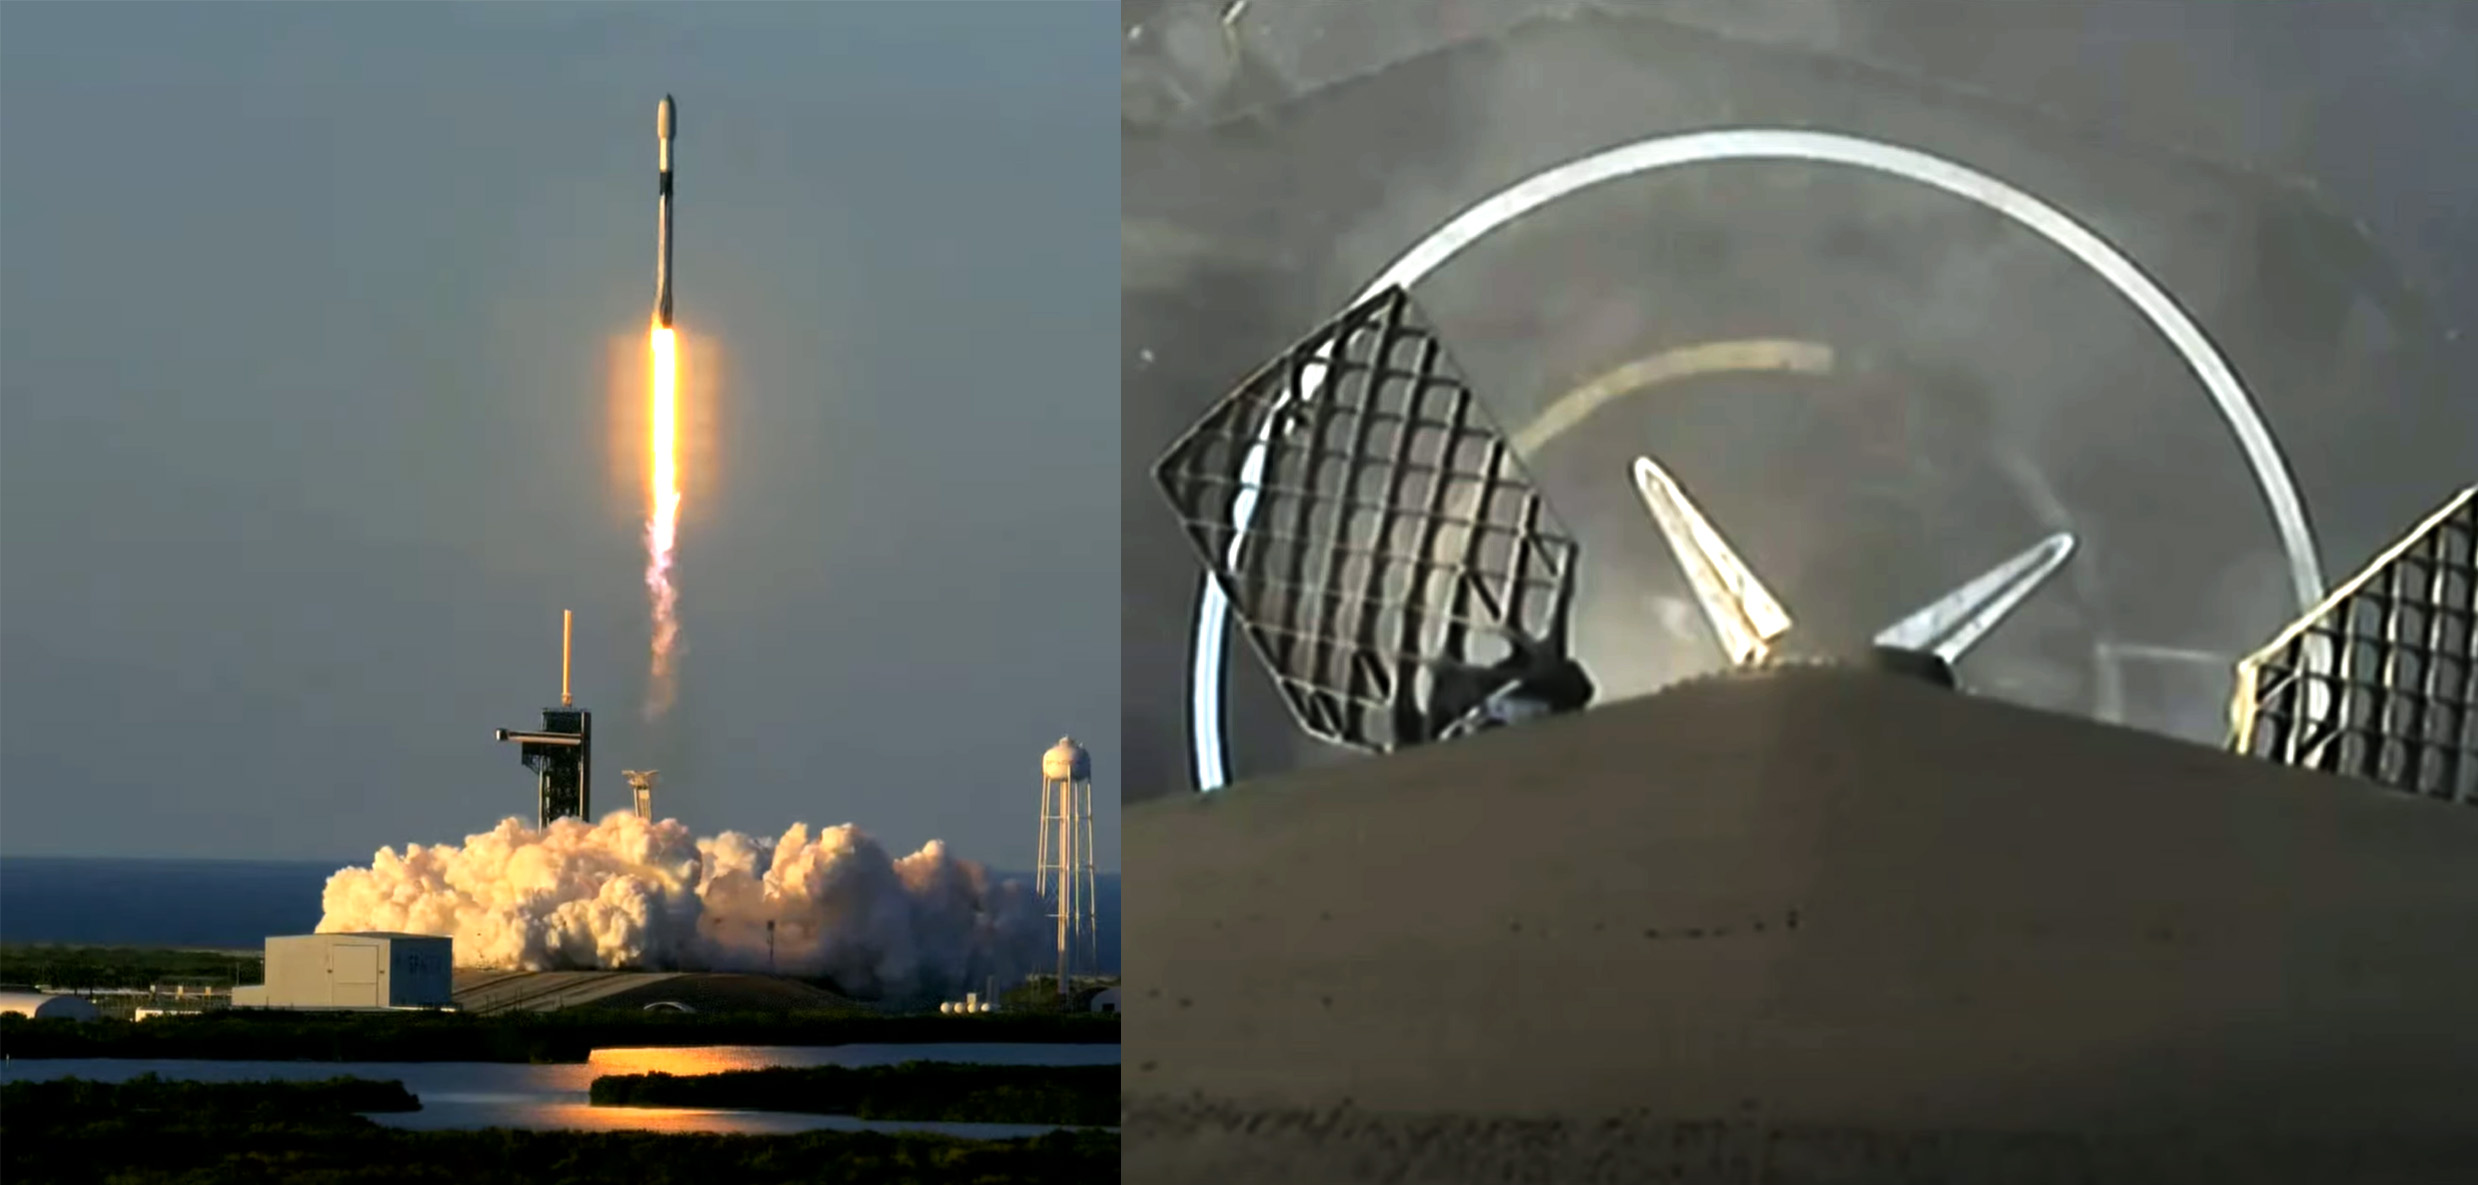 Starlink 4-5 F9 B1062 39A 010622 webcast (SpaceX) launch landing 1